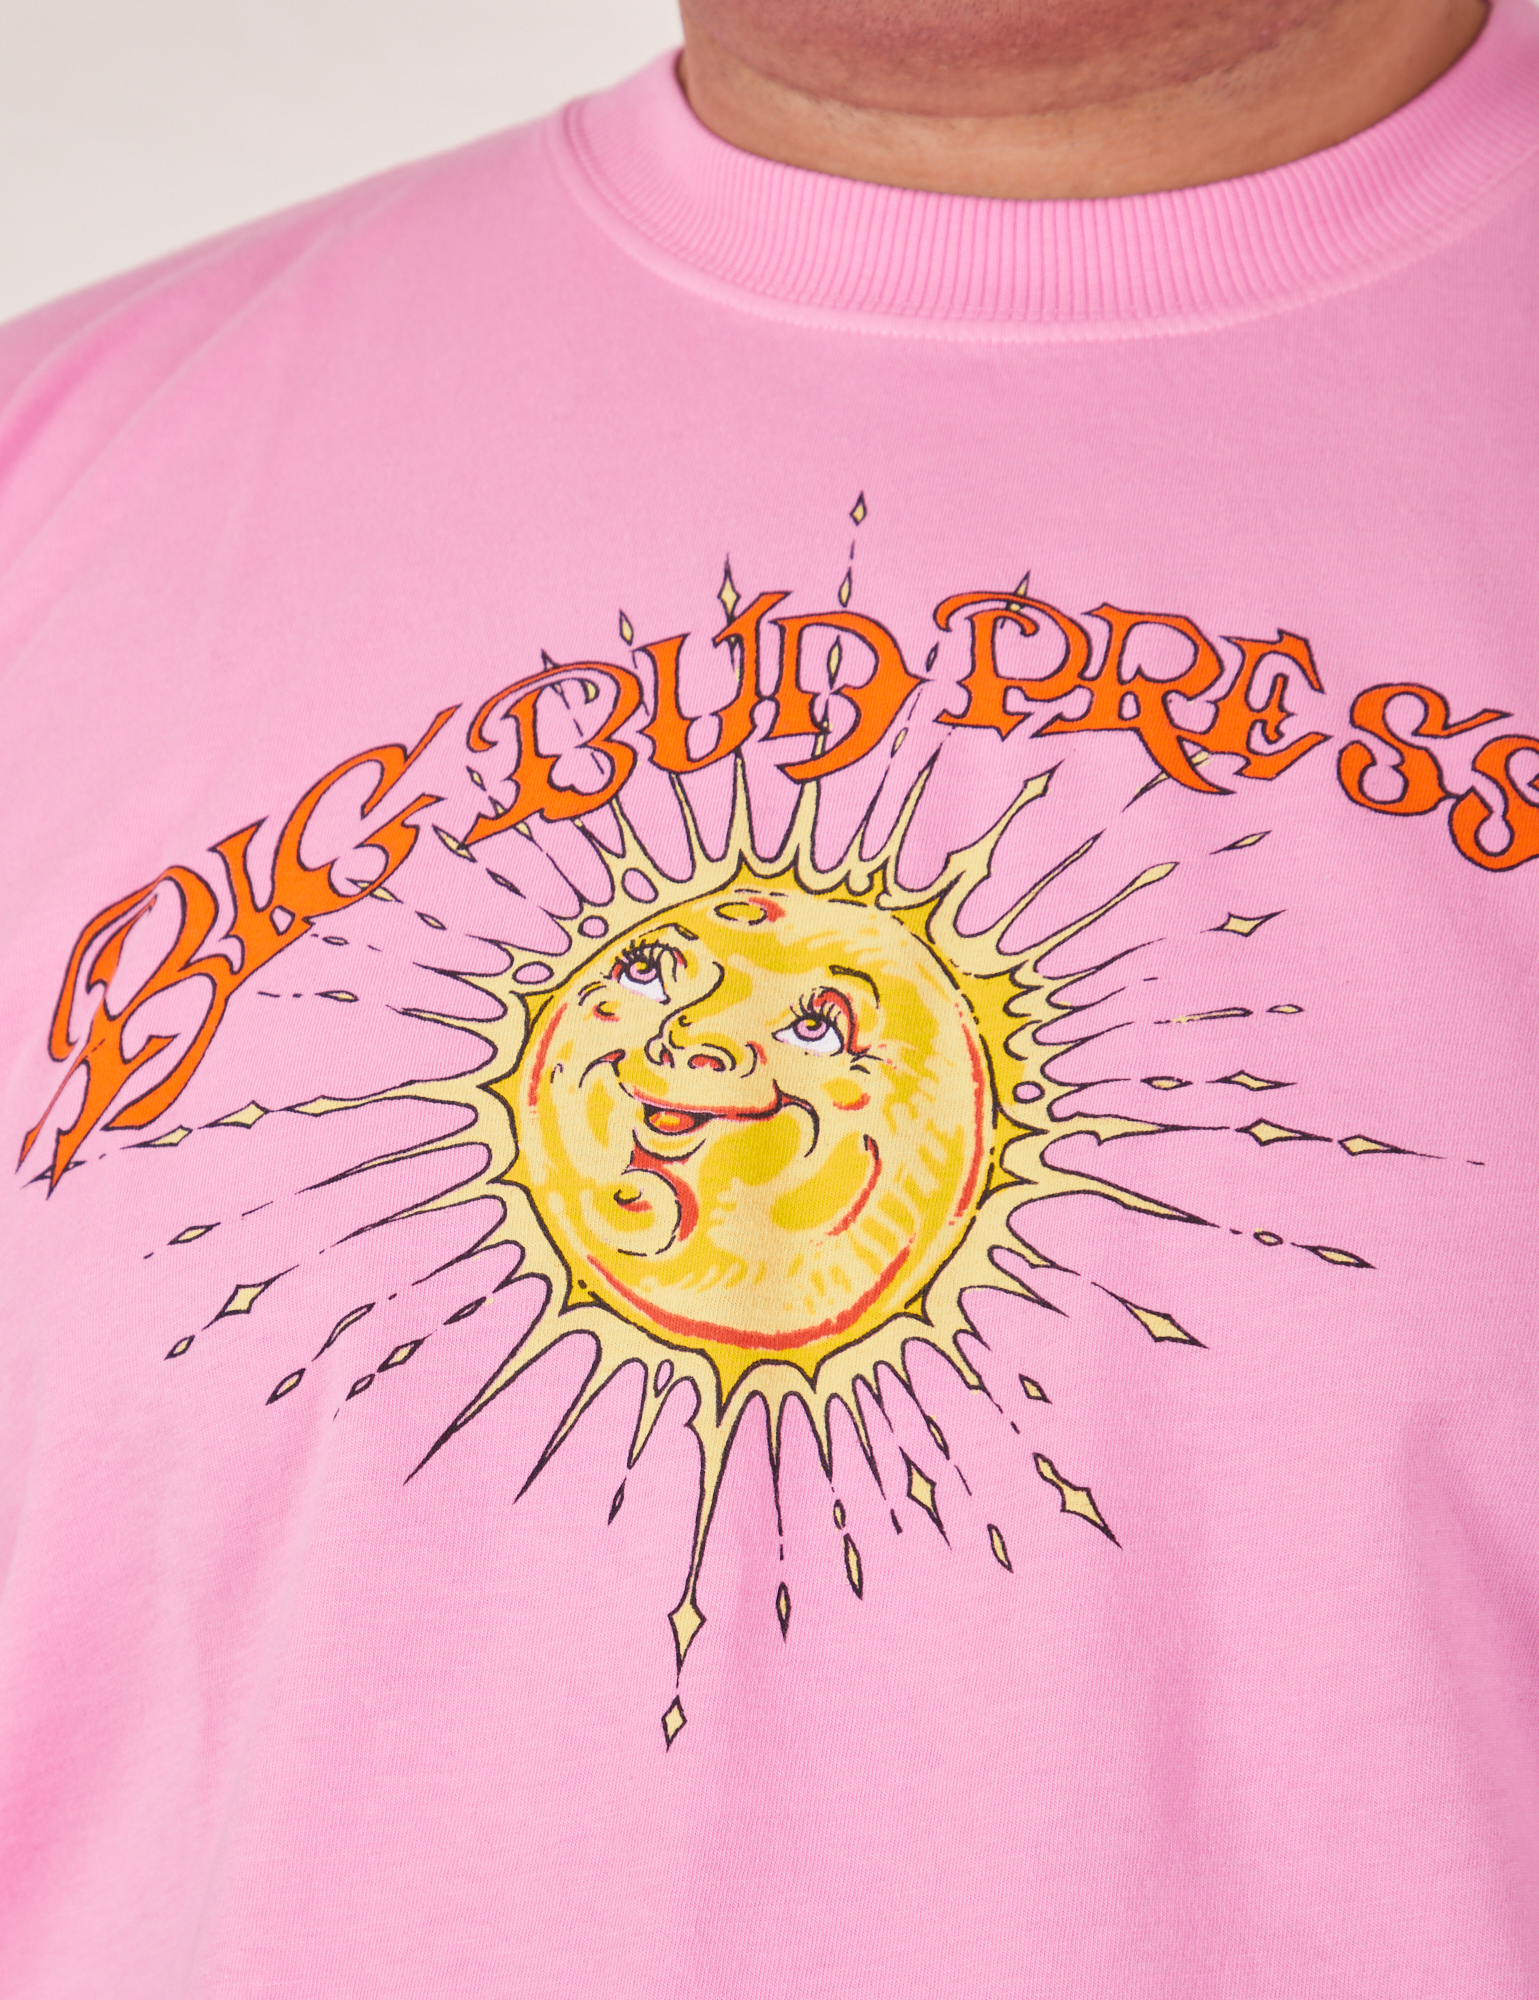 Sun Baby Organic Tee in Bubblegum Pink front close up on Miguel